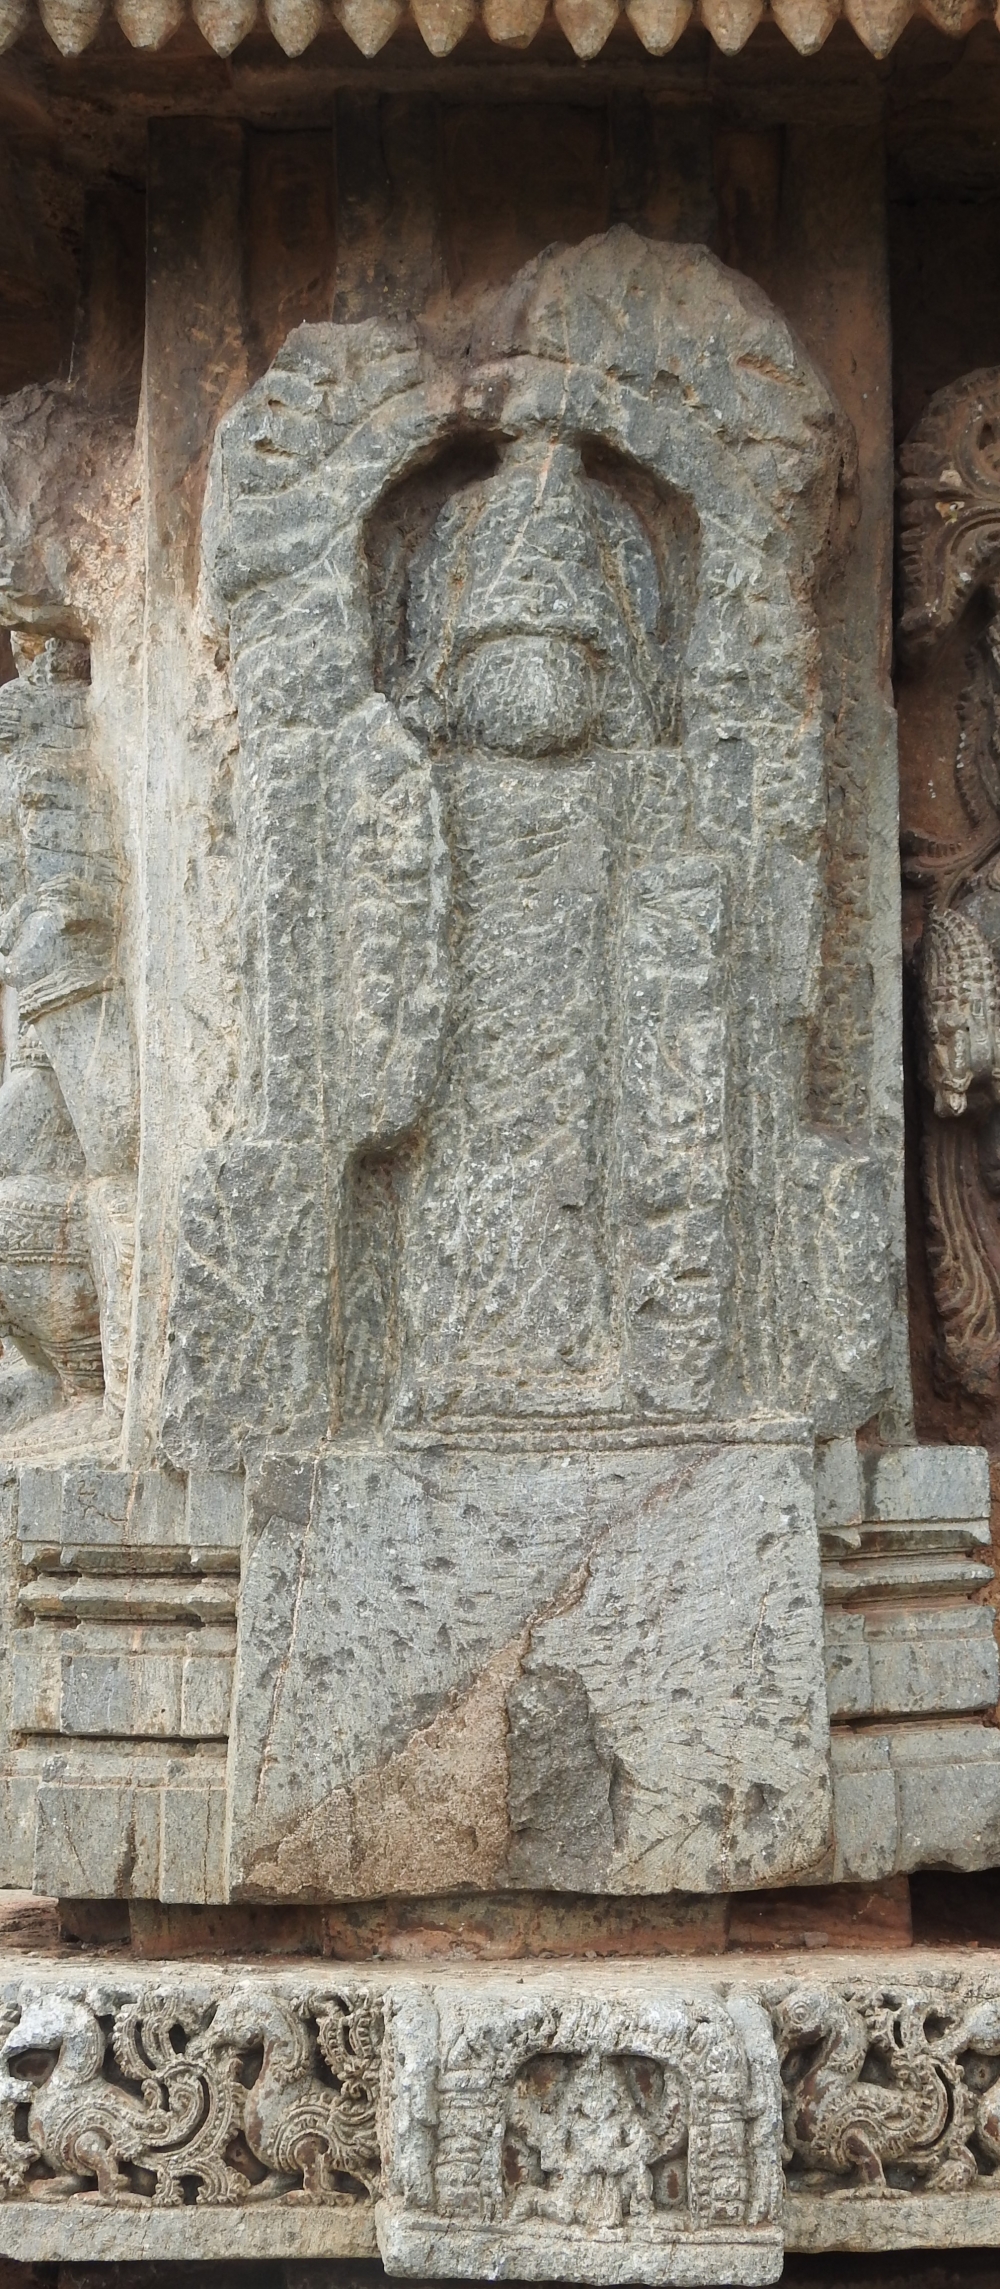 Fig. 4: North side of the circumambulatory path of the temple displays an unfinished image. It is safe to assume that this image is of Lord Vishnu, judging from Garuda, his vahana, carved on the pedestal (Courtesy: Poorva Arun Salvi)